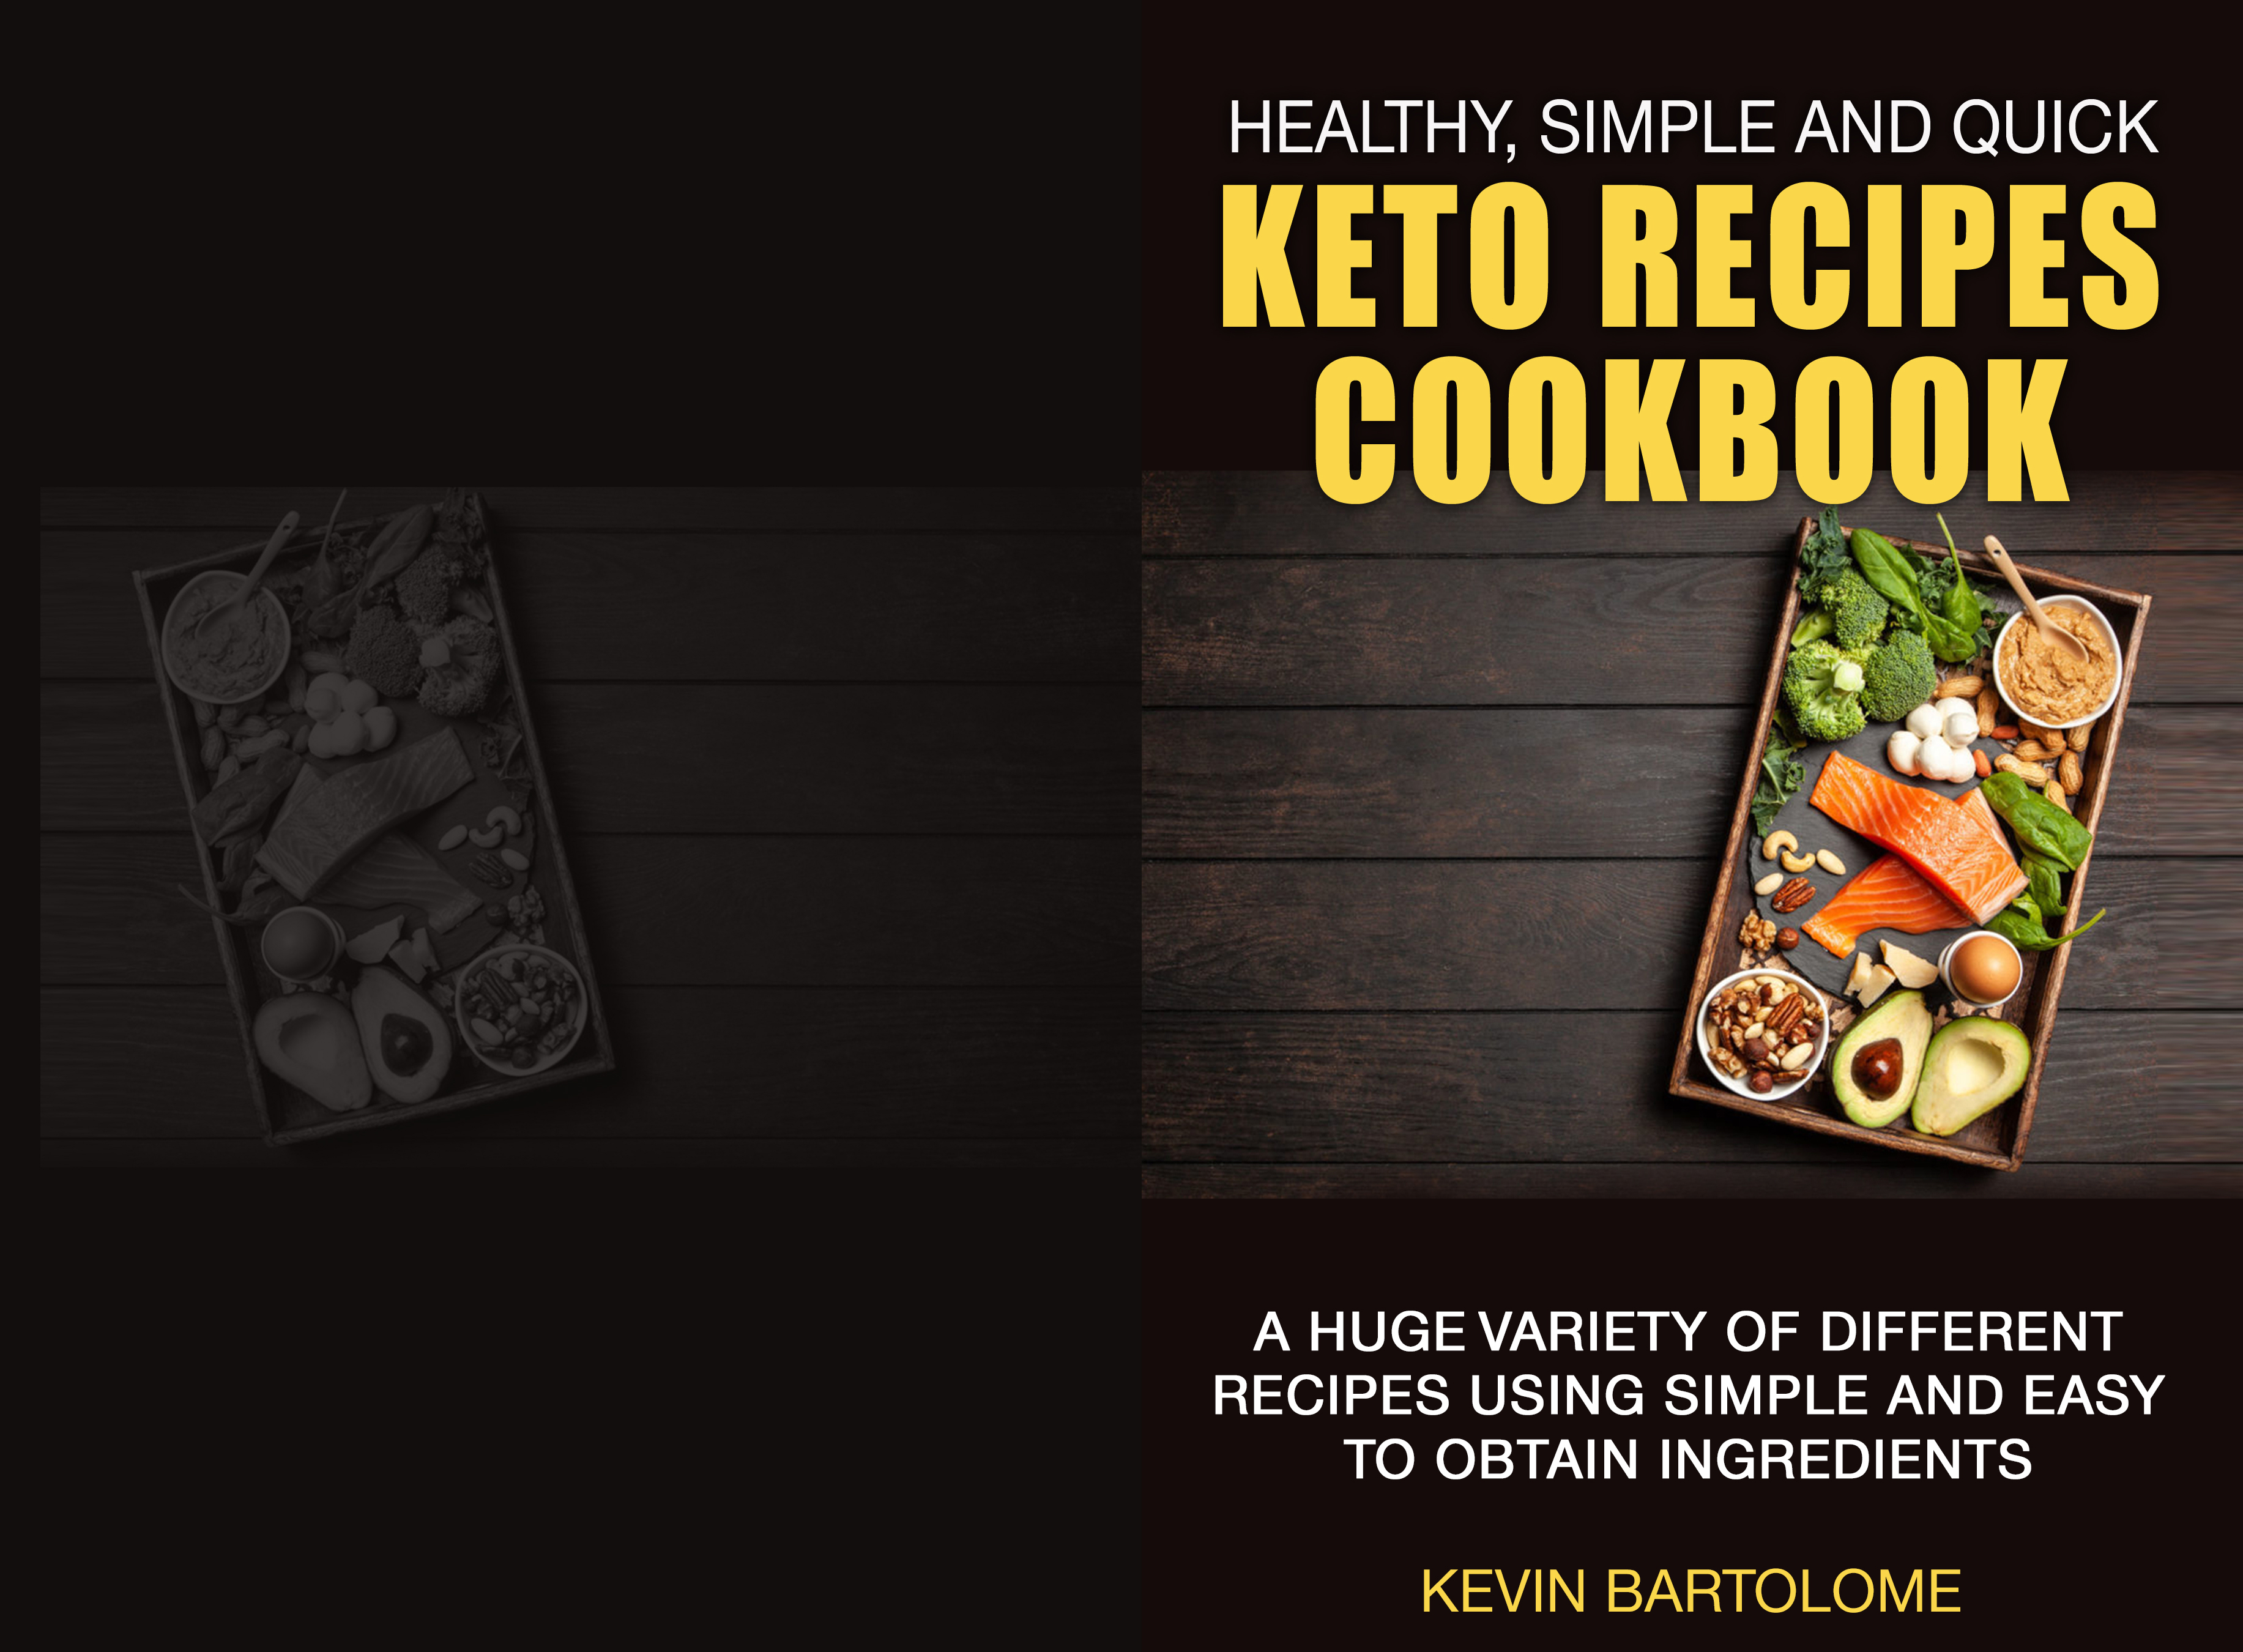 FREE: Healthy, Simple and Quick Keto Recipes Cookbook by Kevin Bartolome